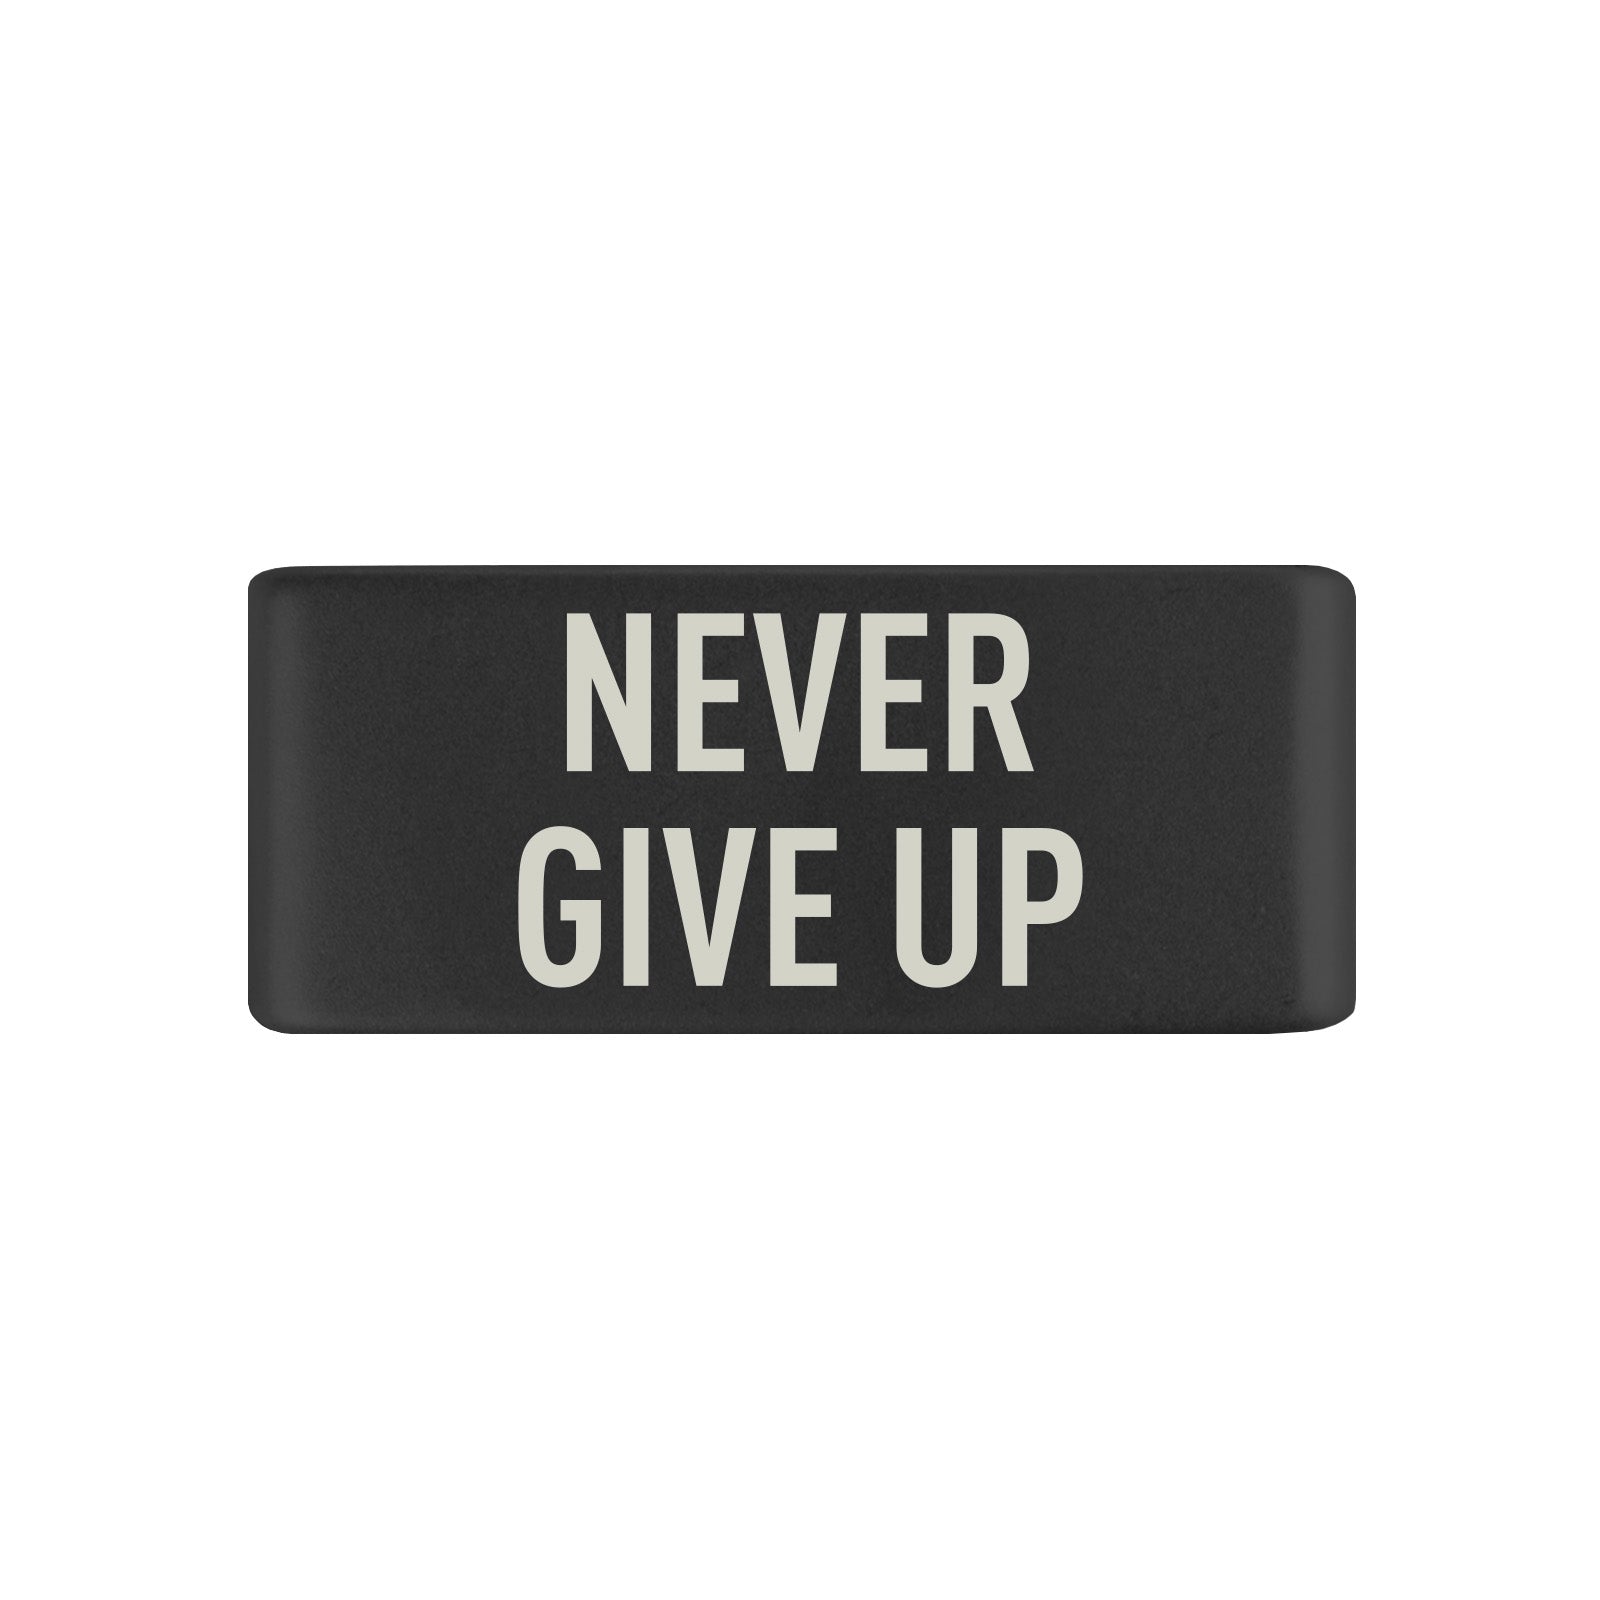 Never Give Up Badge Badge 13mm - ROAD iD